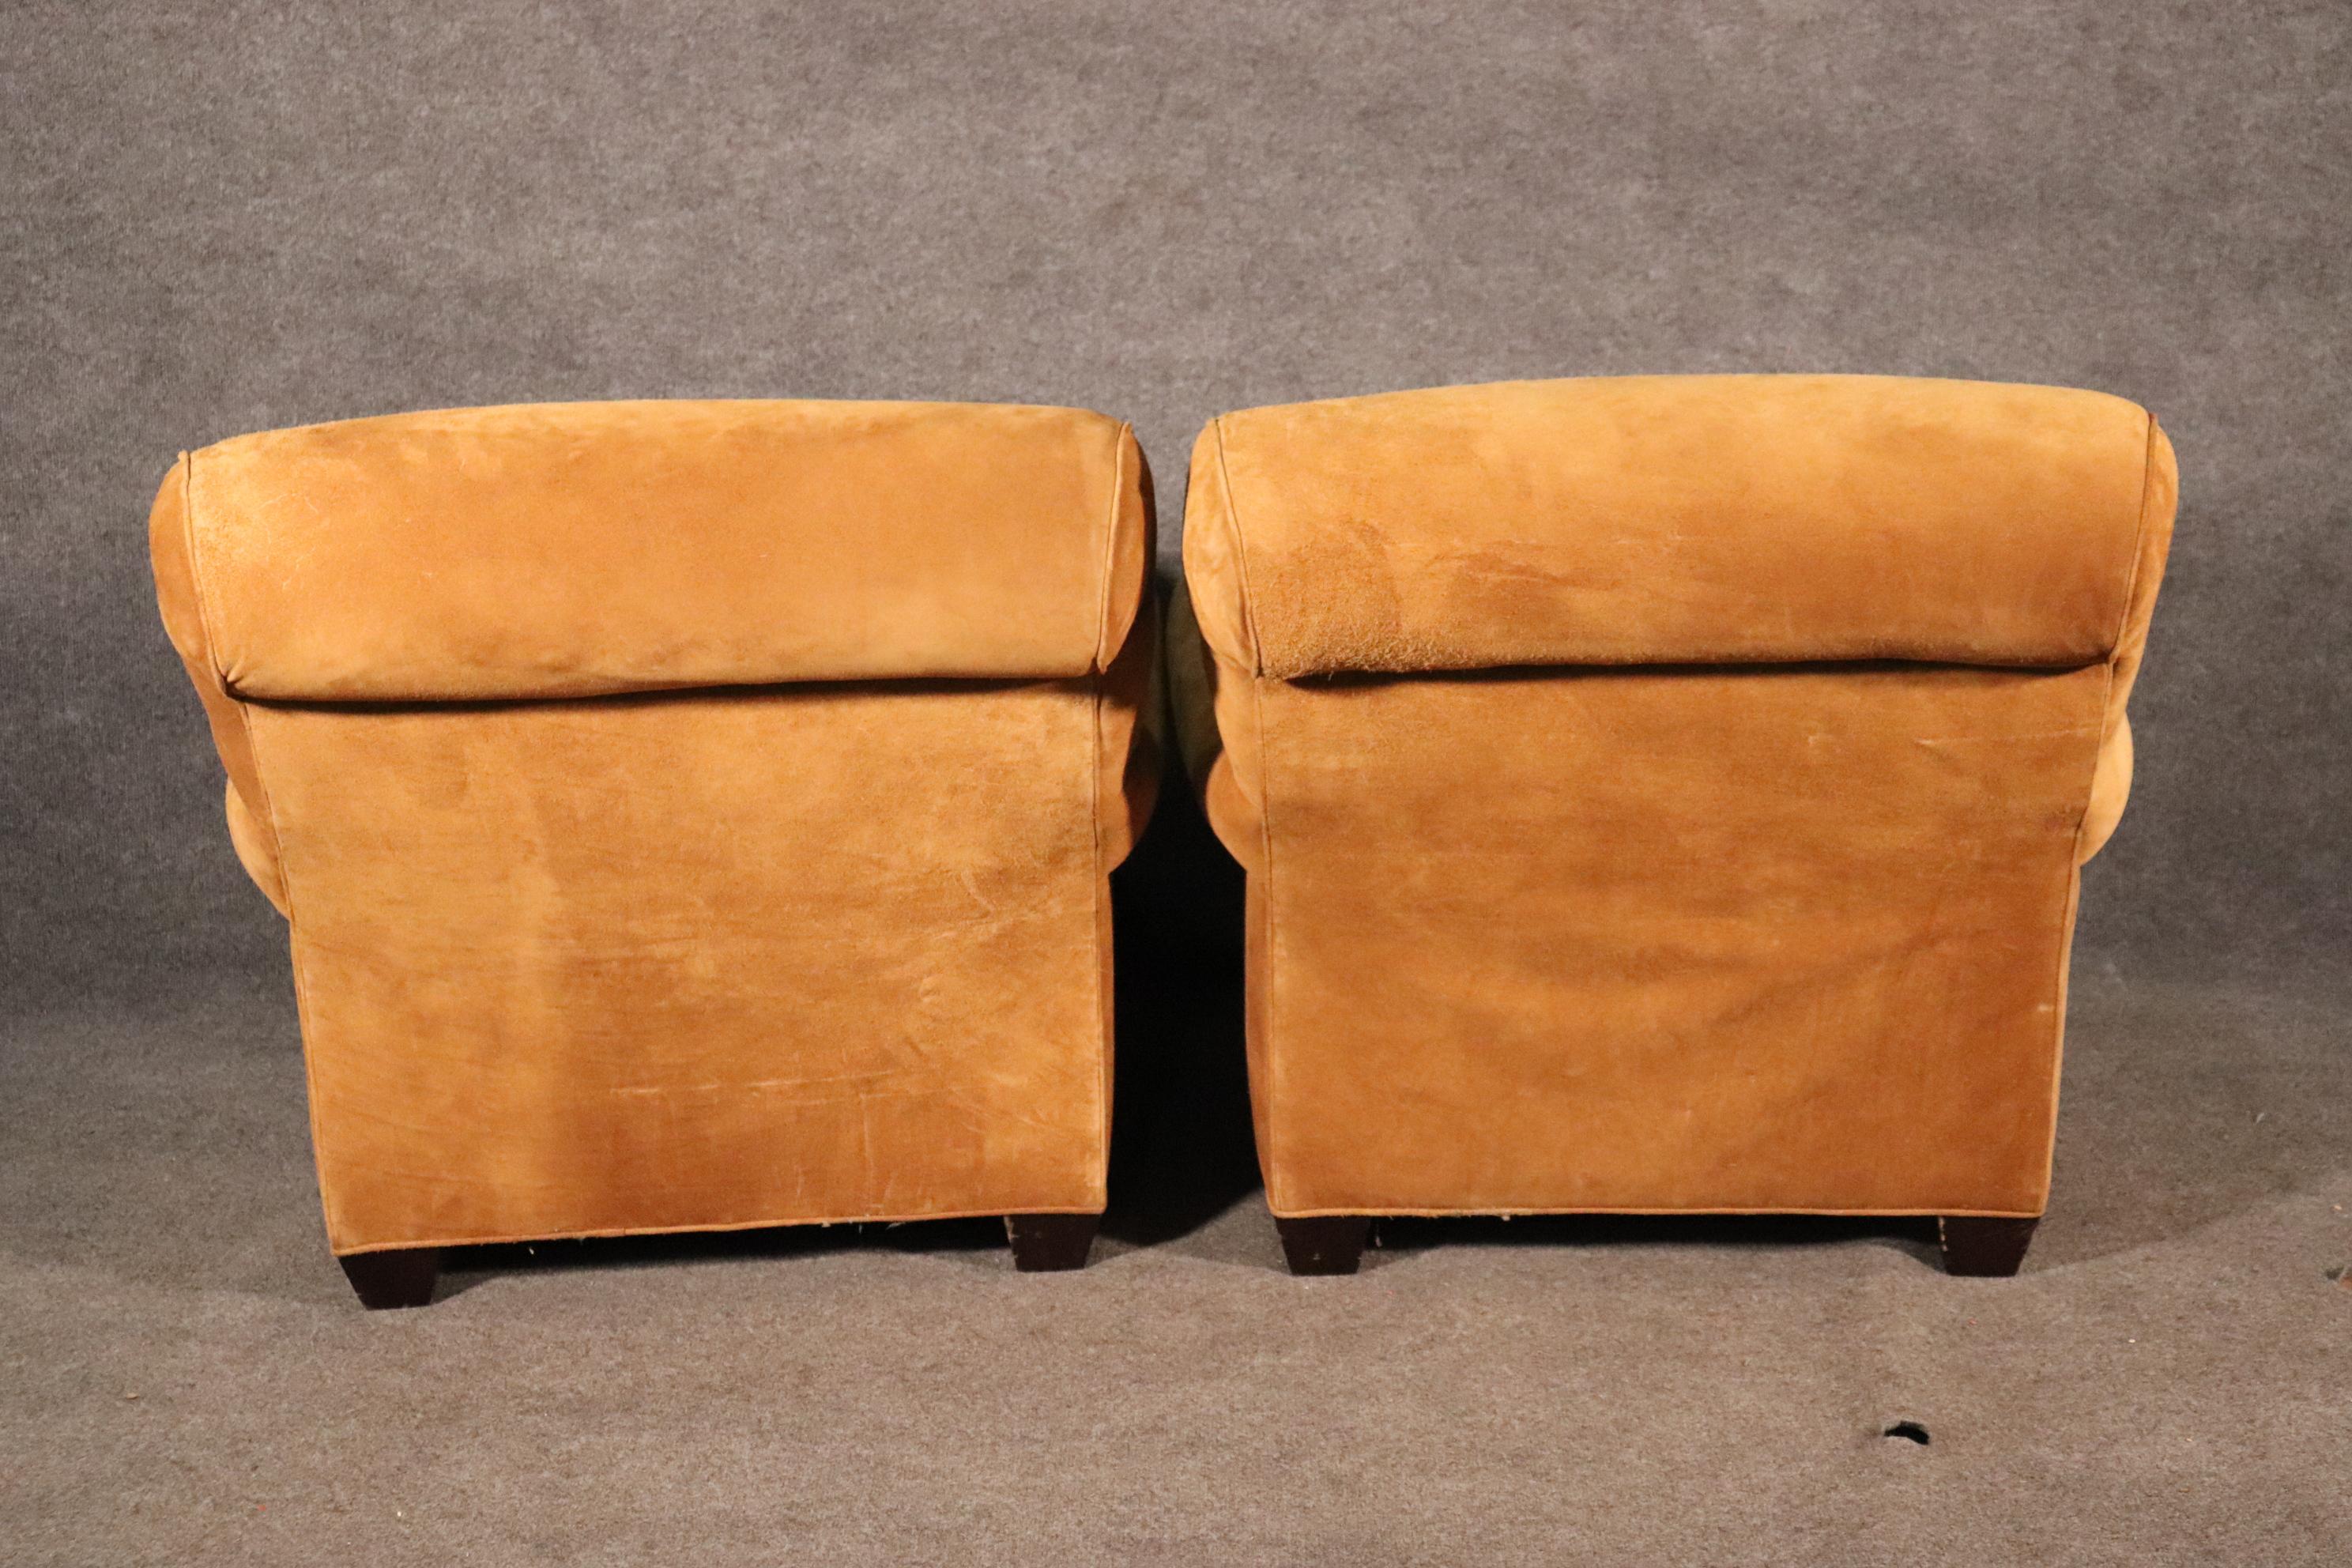 American Pair of Sand Hued Genuine Suede Large Scale Williams Sonoma Club Chairs